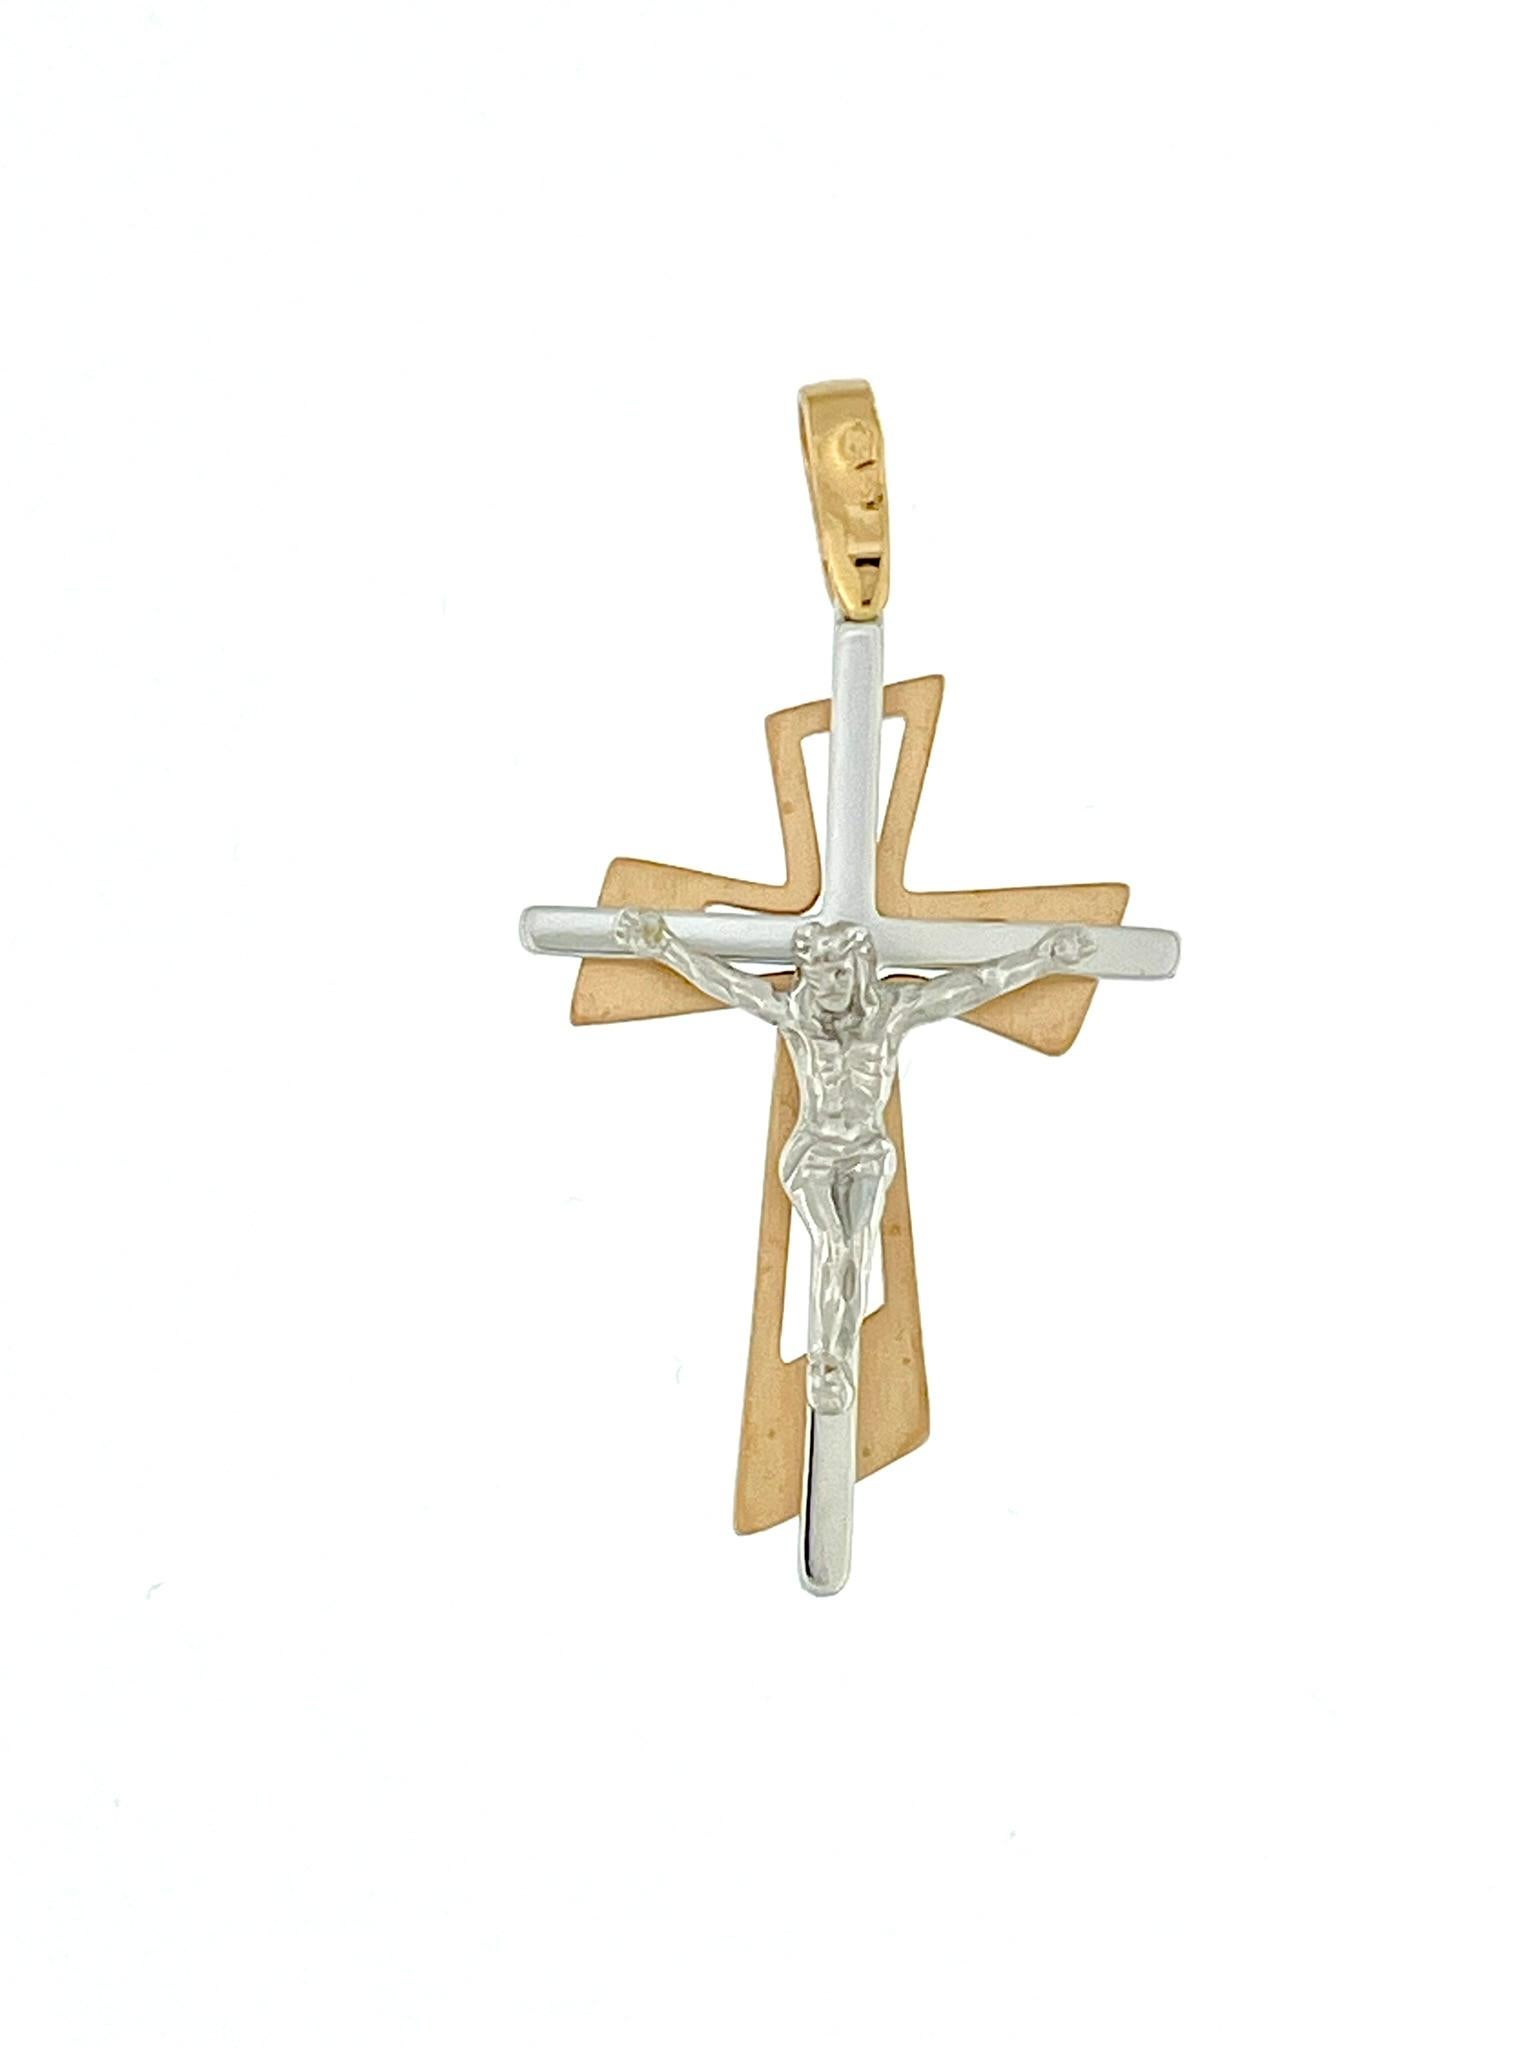 This exquisite crucifix is crafted from a combination of 18-karat rose and white gold, showcasing a meticulous blend of elegance and religious symbolism. The body of Jesus, a central and spiritually significant element, is crafted from white gold,